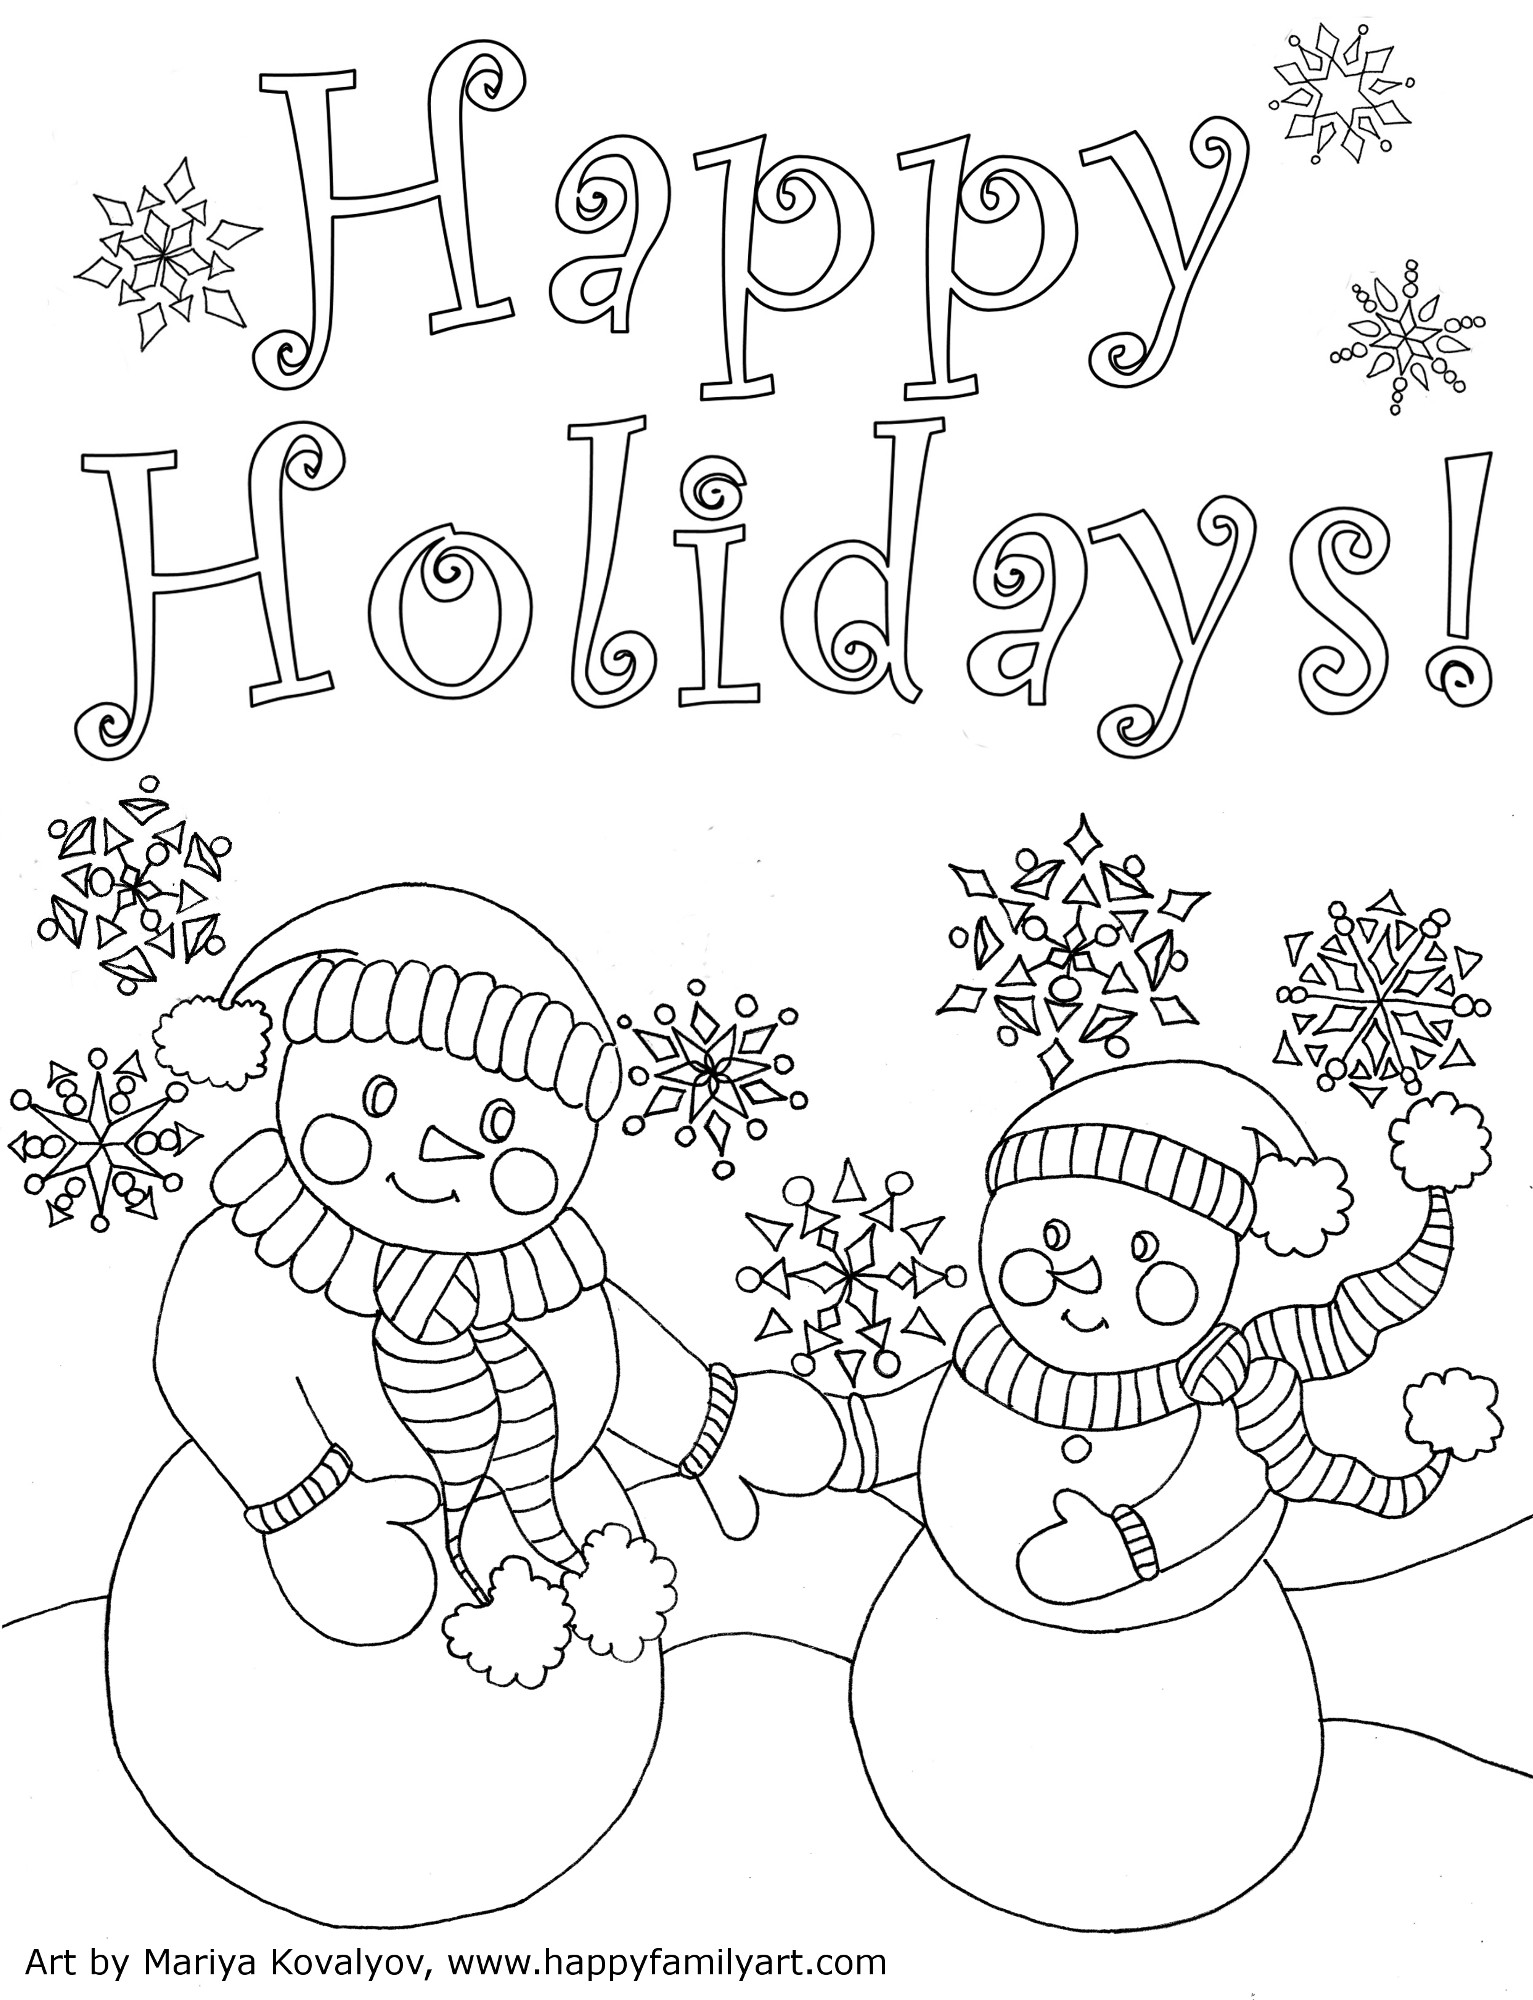 Printable Holiday Coloring Pages
 Happy Family Art original and fun coloring pages